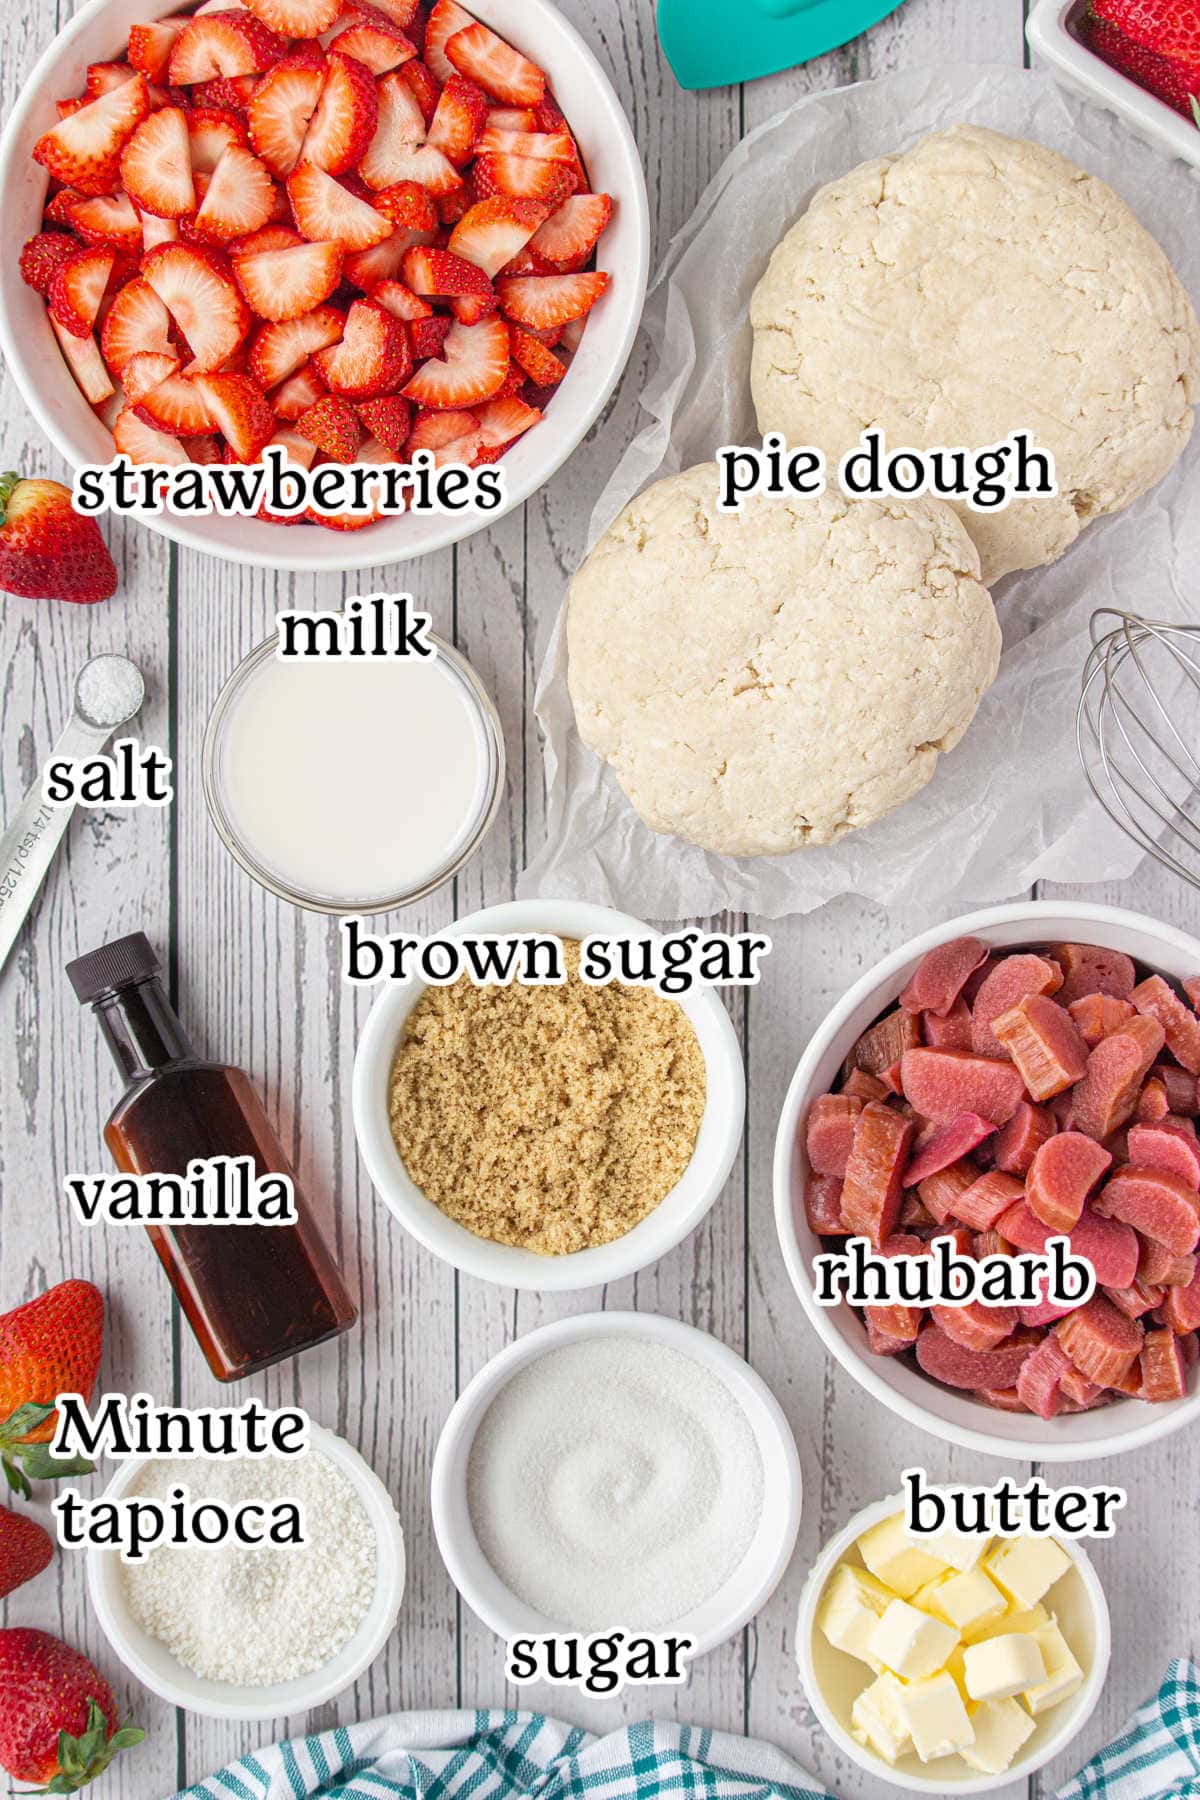 Labeled ingredients for strawberry rhubarb pie.